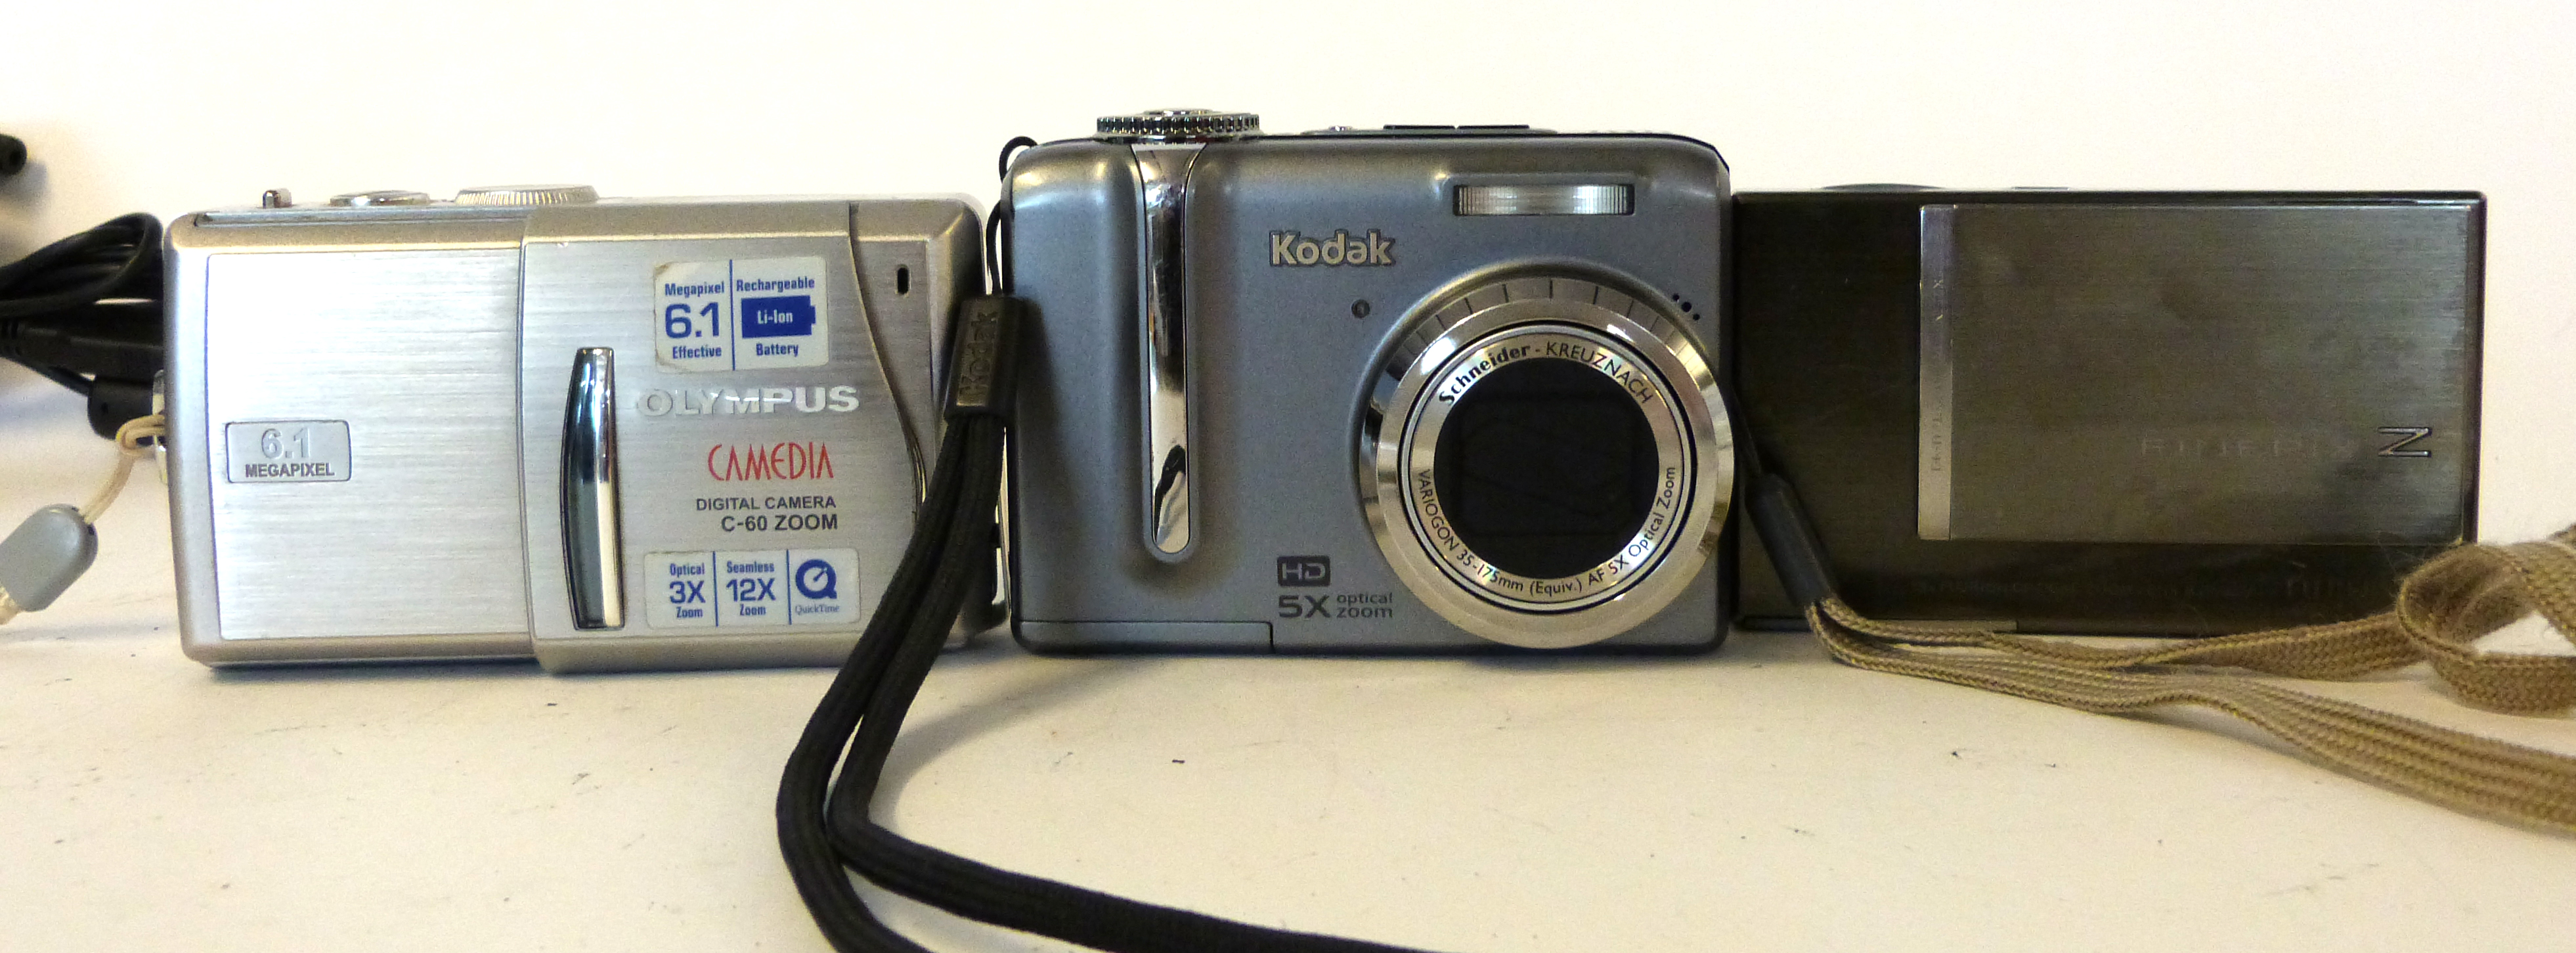 Mixed Lot: Fujifilm Finepix Z100 FD, a Kodad Easyshare 21275 and an Olympus Camedia C-60 - Image 2 of 4